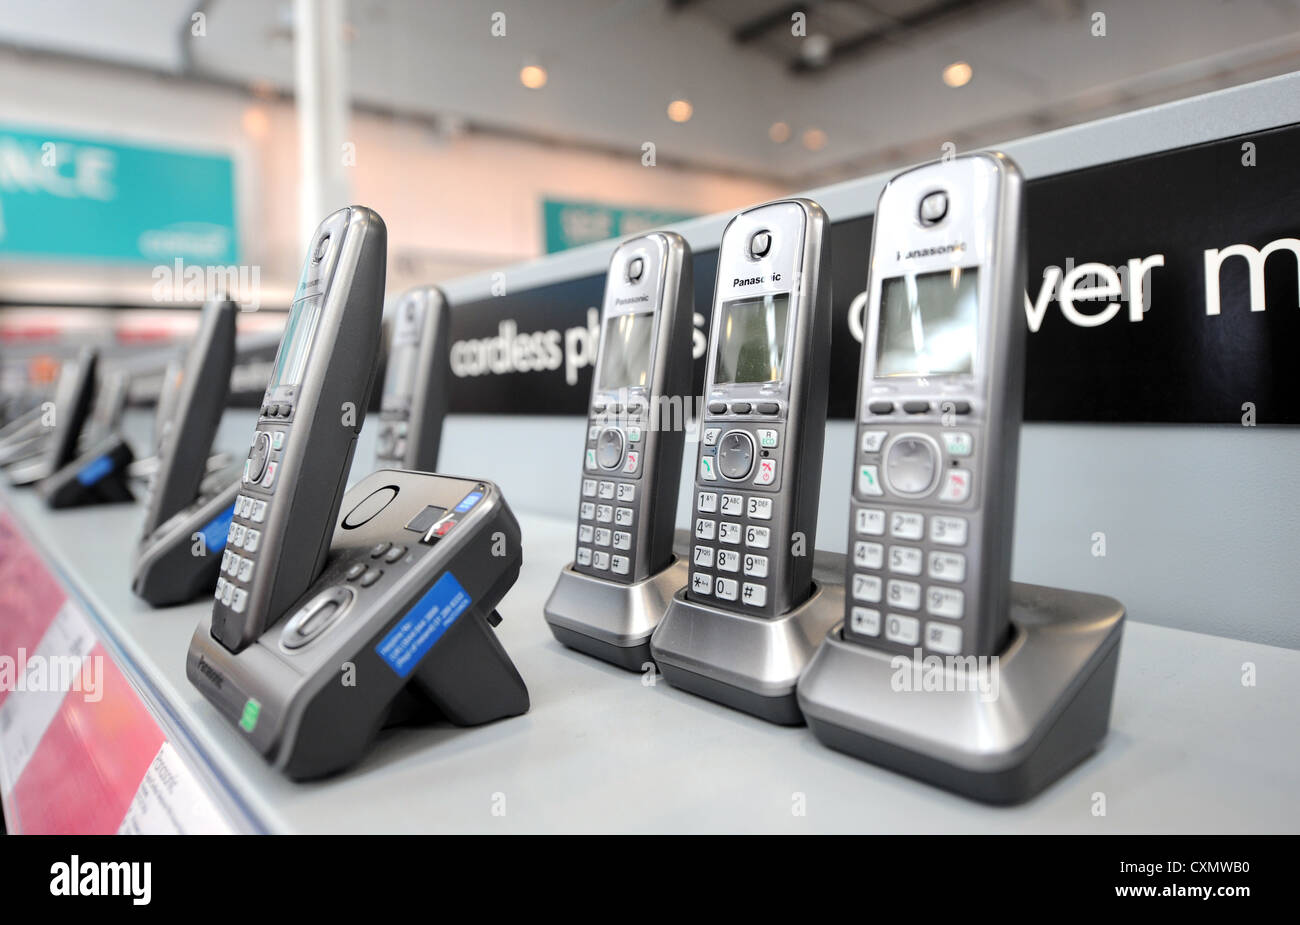 Panasonic telephone handsets for sale at Comet Electrical Goods store interior Stock Photo